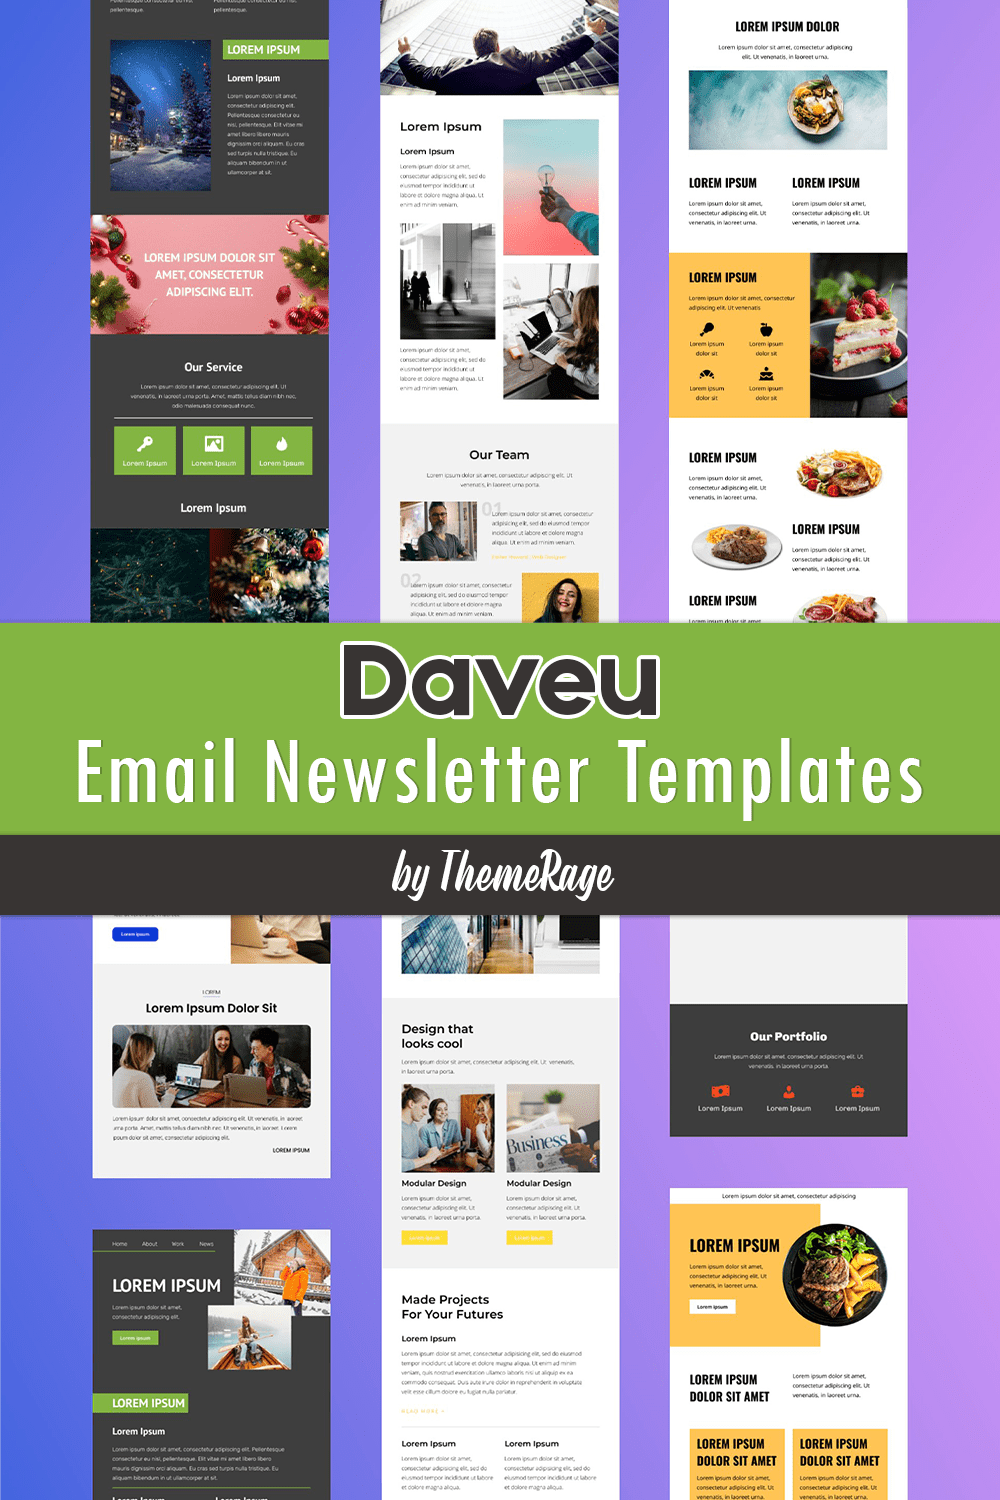 Pack of images of gorgeous email design templates.